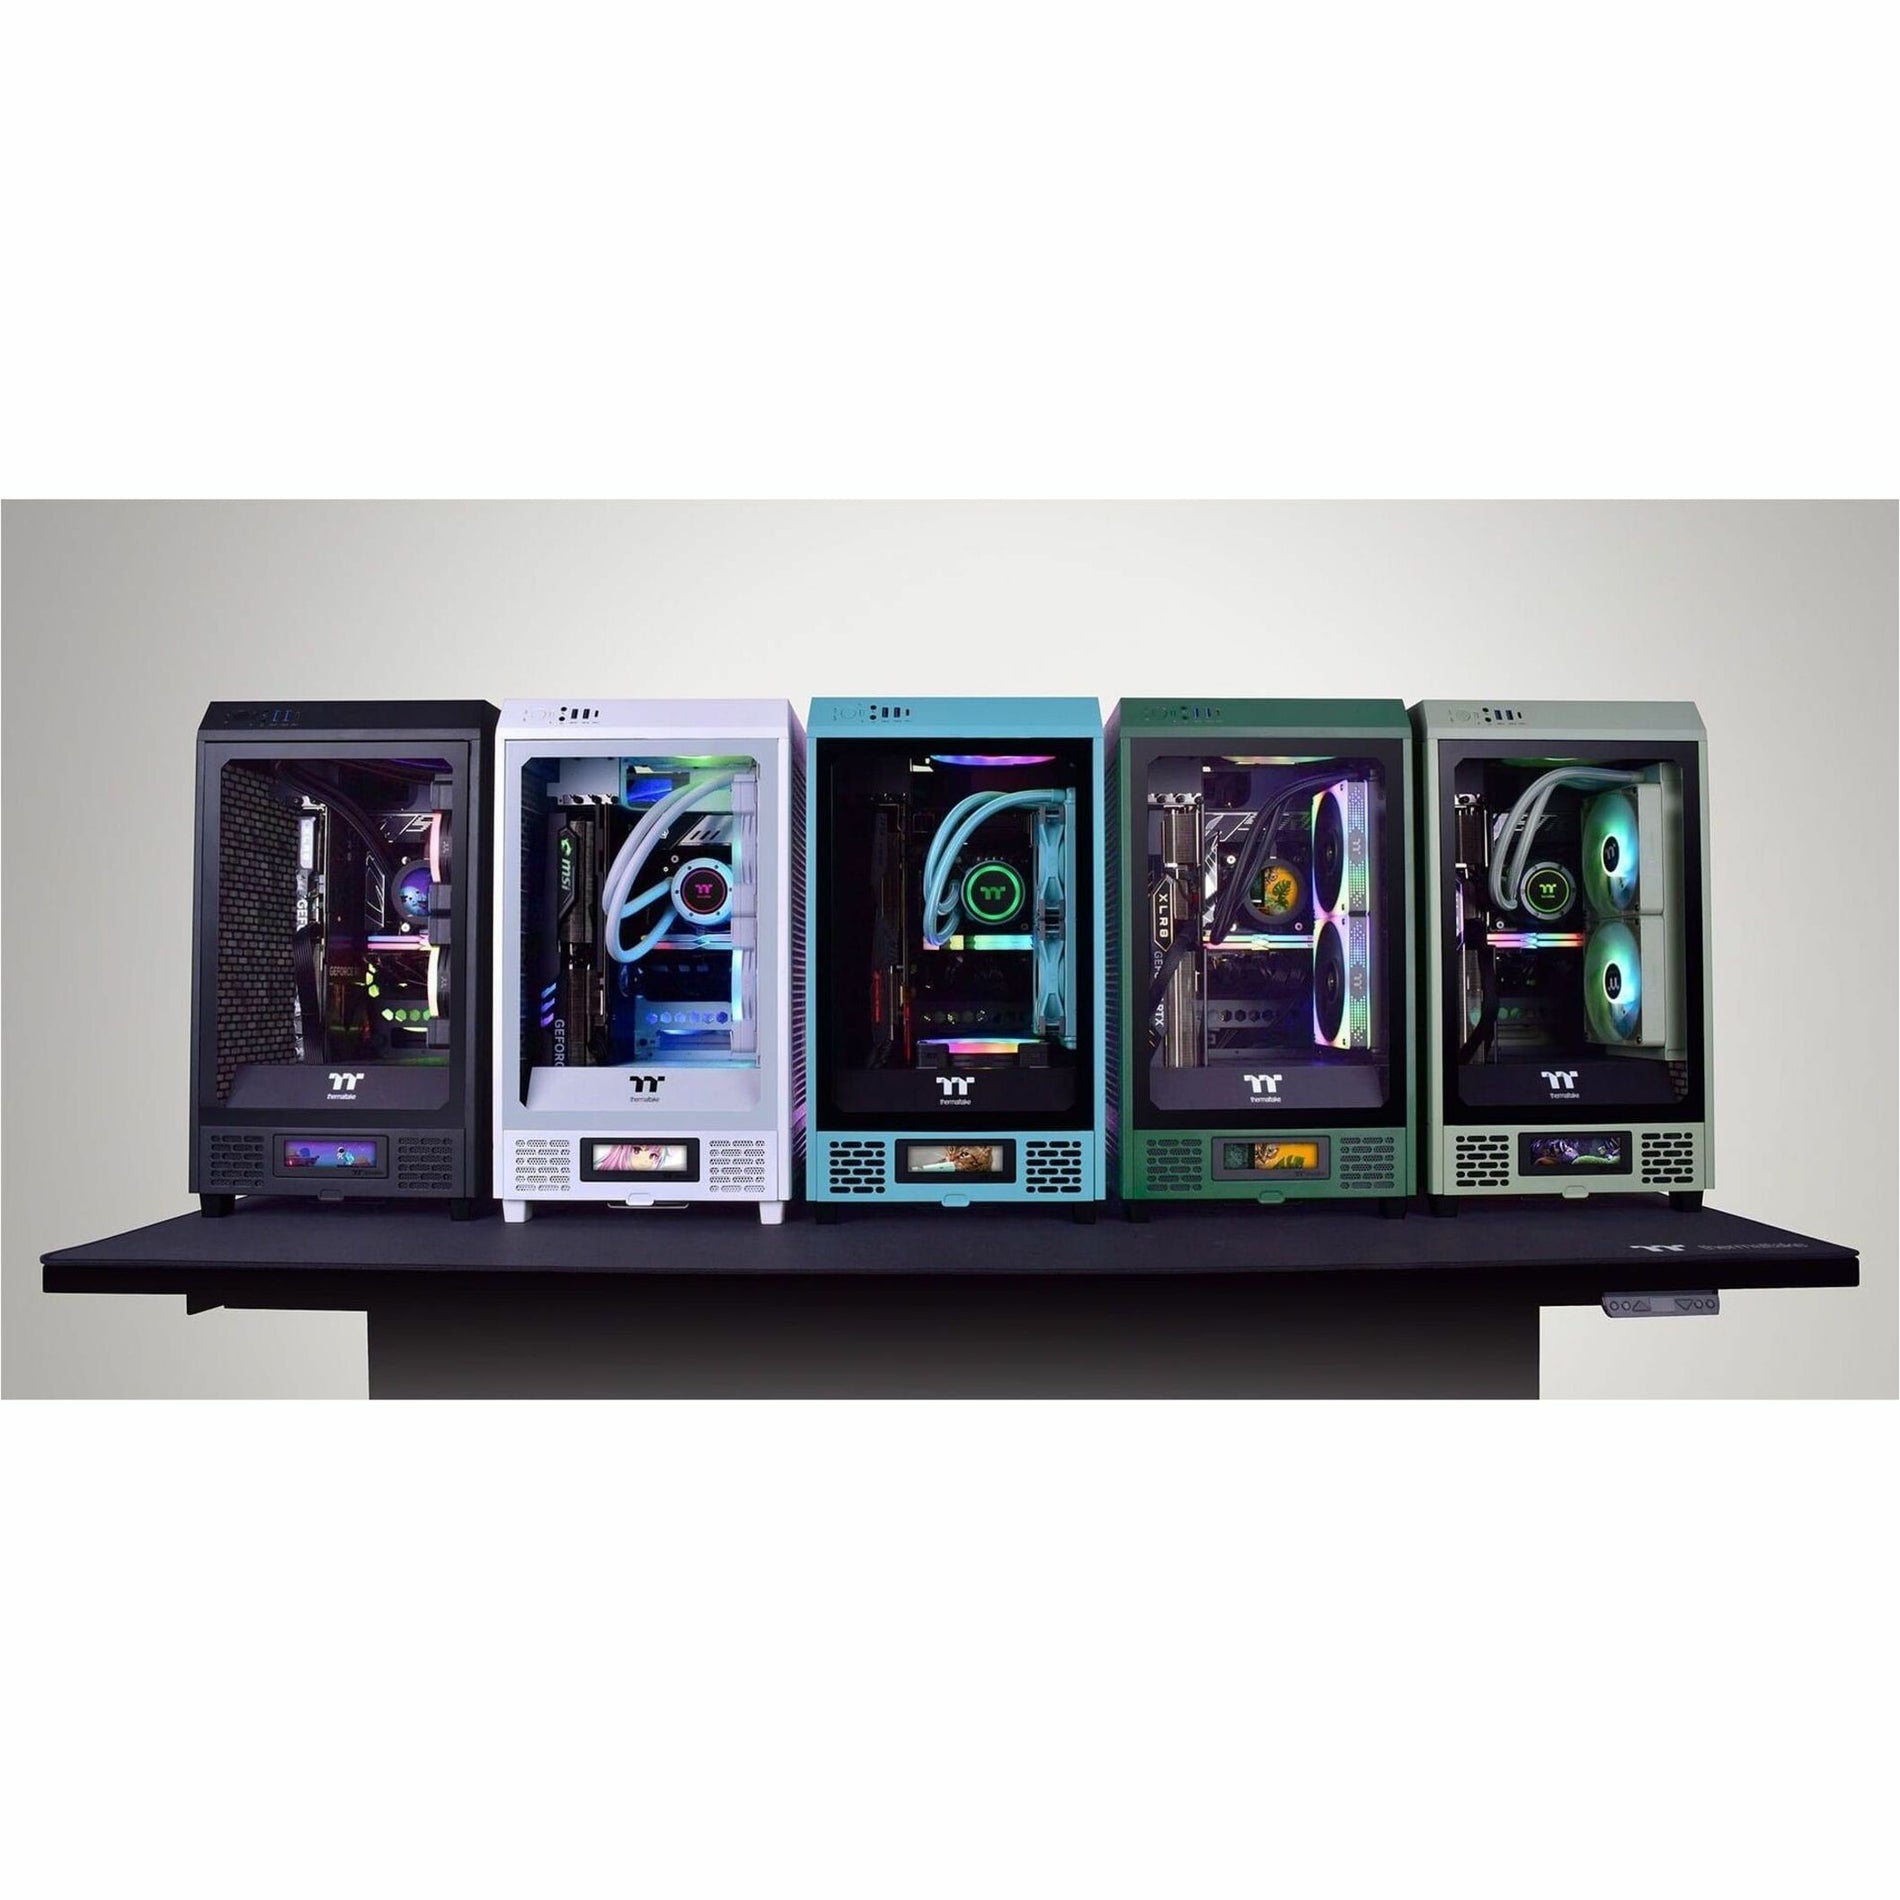 Thermaltake CA-1X9-00SBWN-00 The Tower 200 Turquoise Mini Chassis, Gaming Computer Case with 1200W Power Supply